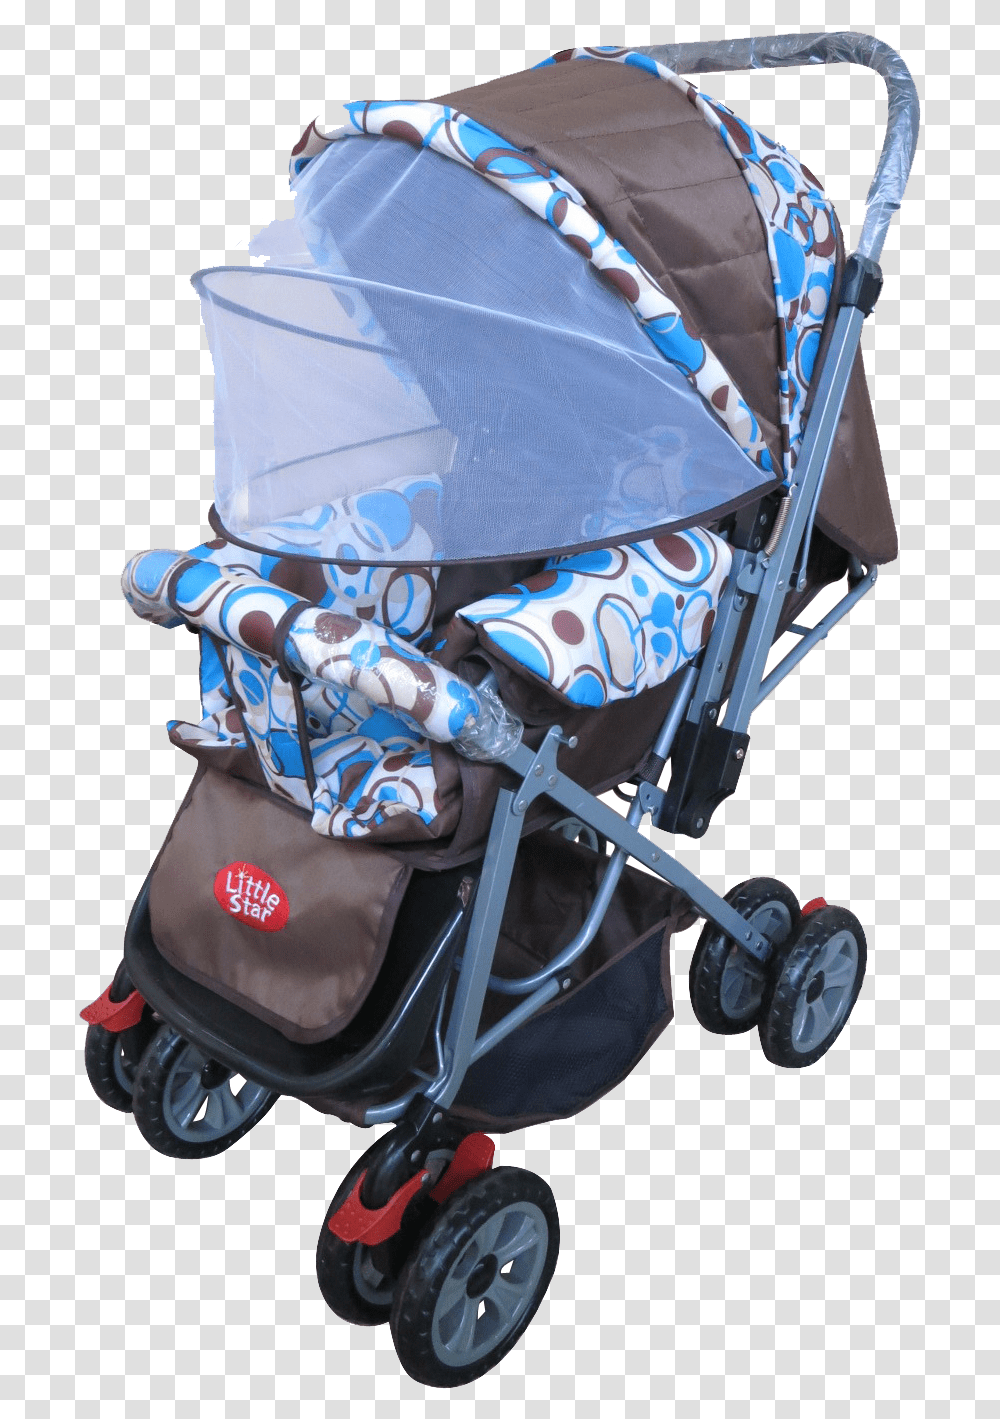 Baby Carriage Baby Girl Carriage Background, Stroller, Motorcycle, Vehicle, Transportation Transparent Png